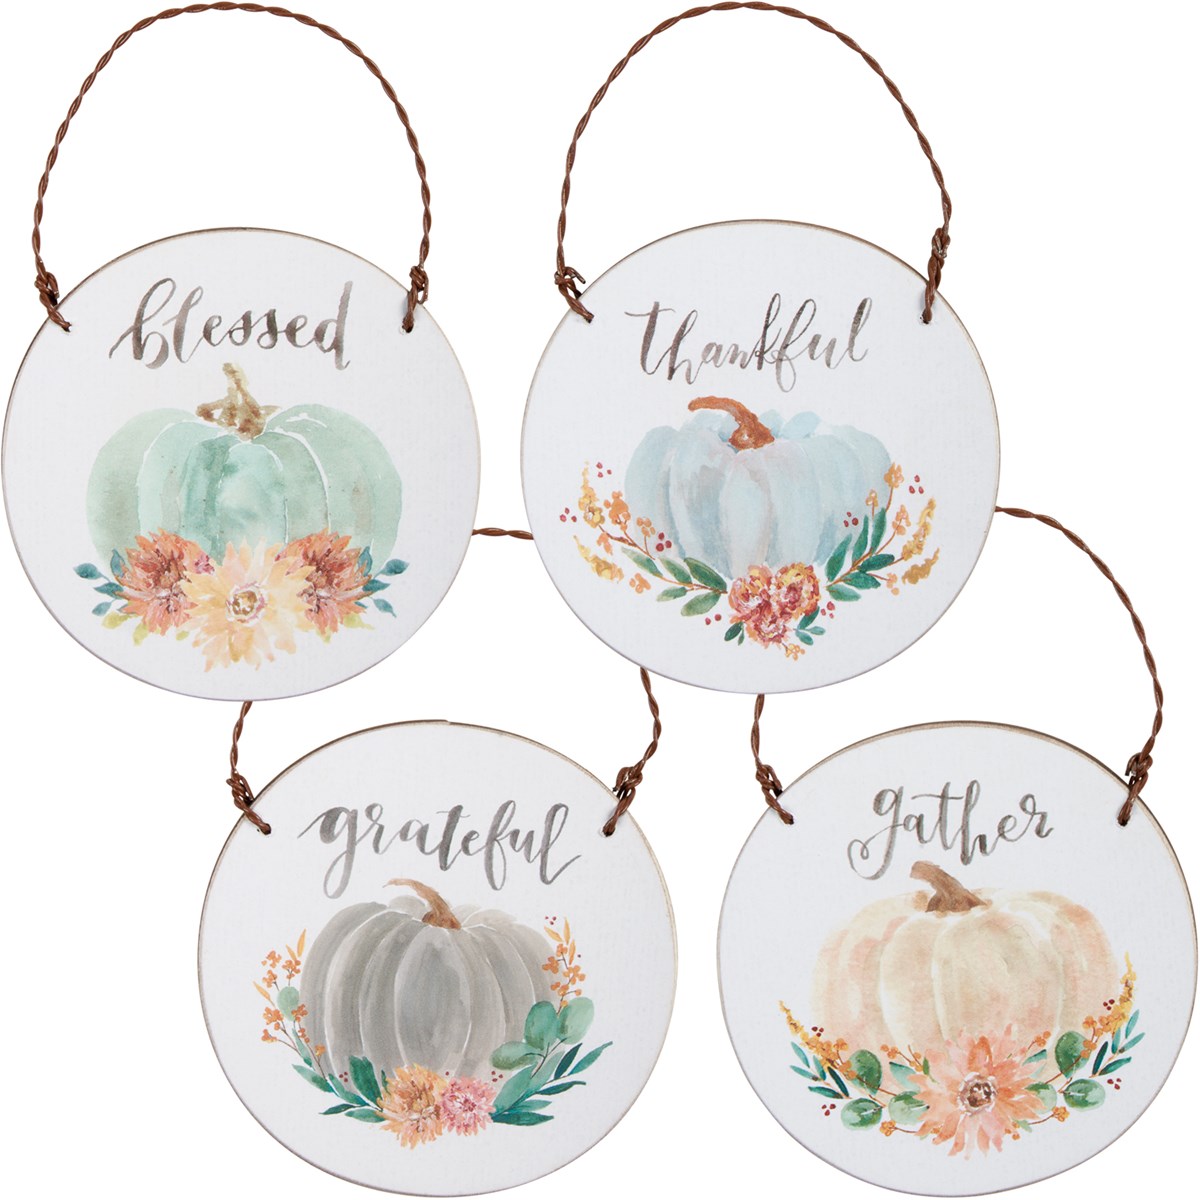 Ornament Set - Blessed - 3" Diameter x 0.25" - Wood, Paper, Wire